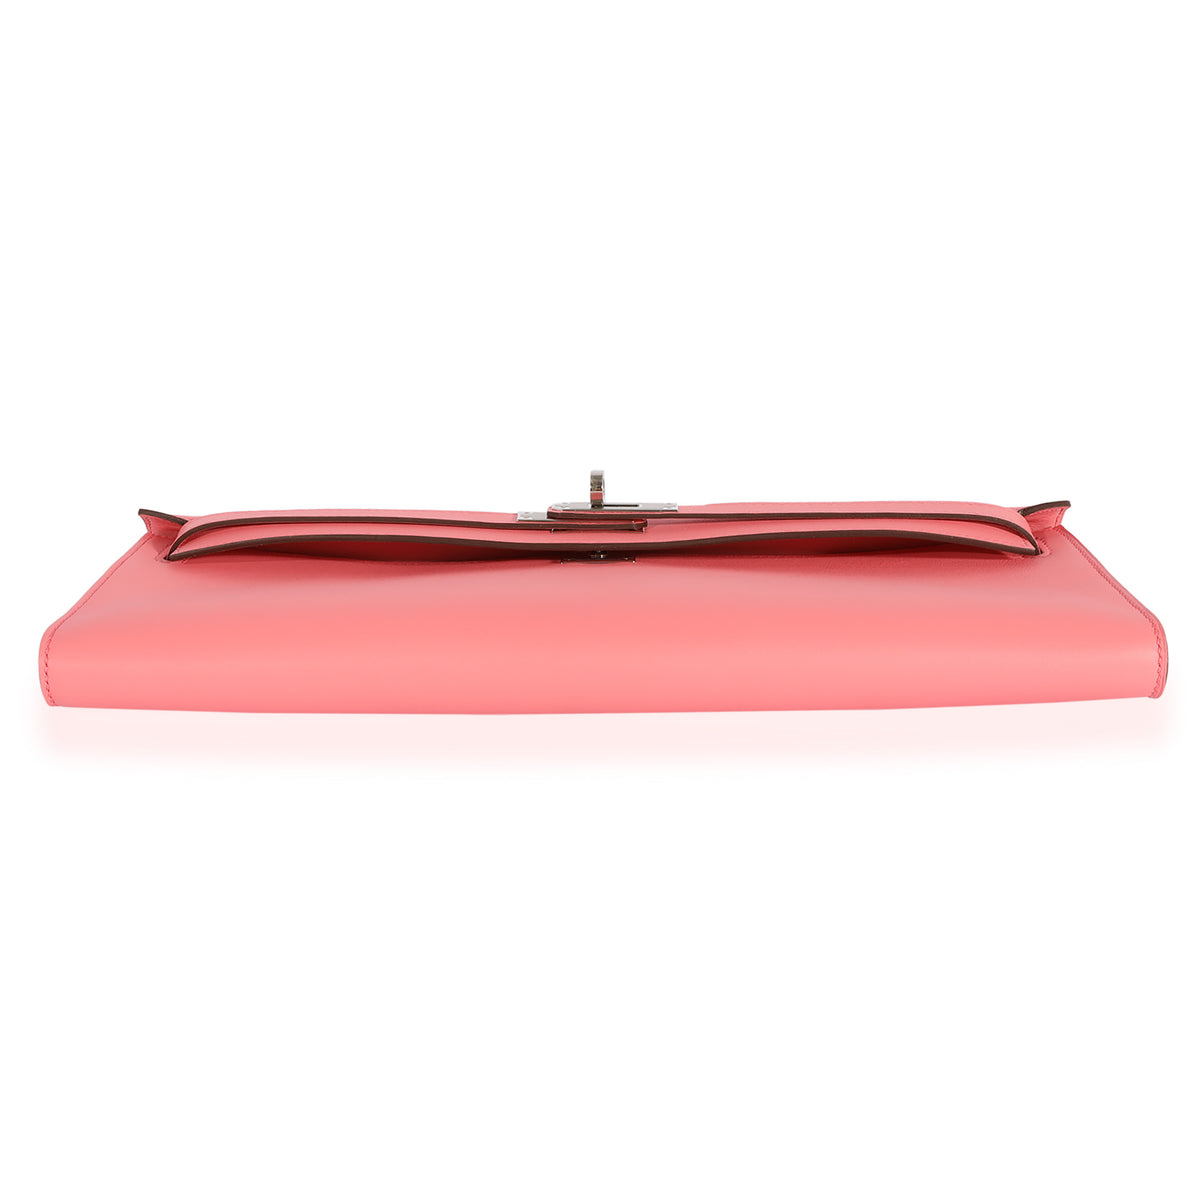 SOLD OUT** NEW HERMES Kelly Cut Clutch. Rose Azalee / PHW. 100% Authentic